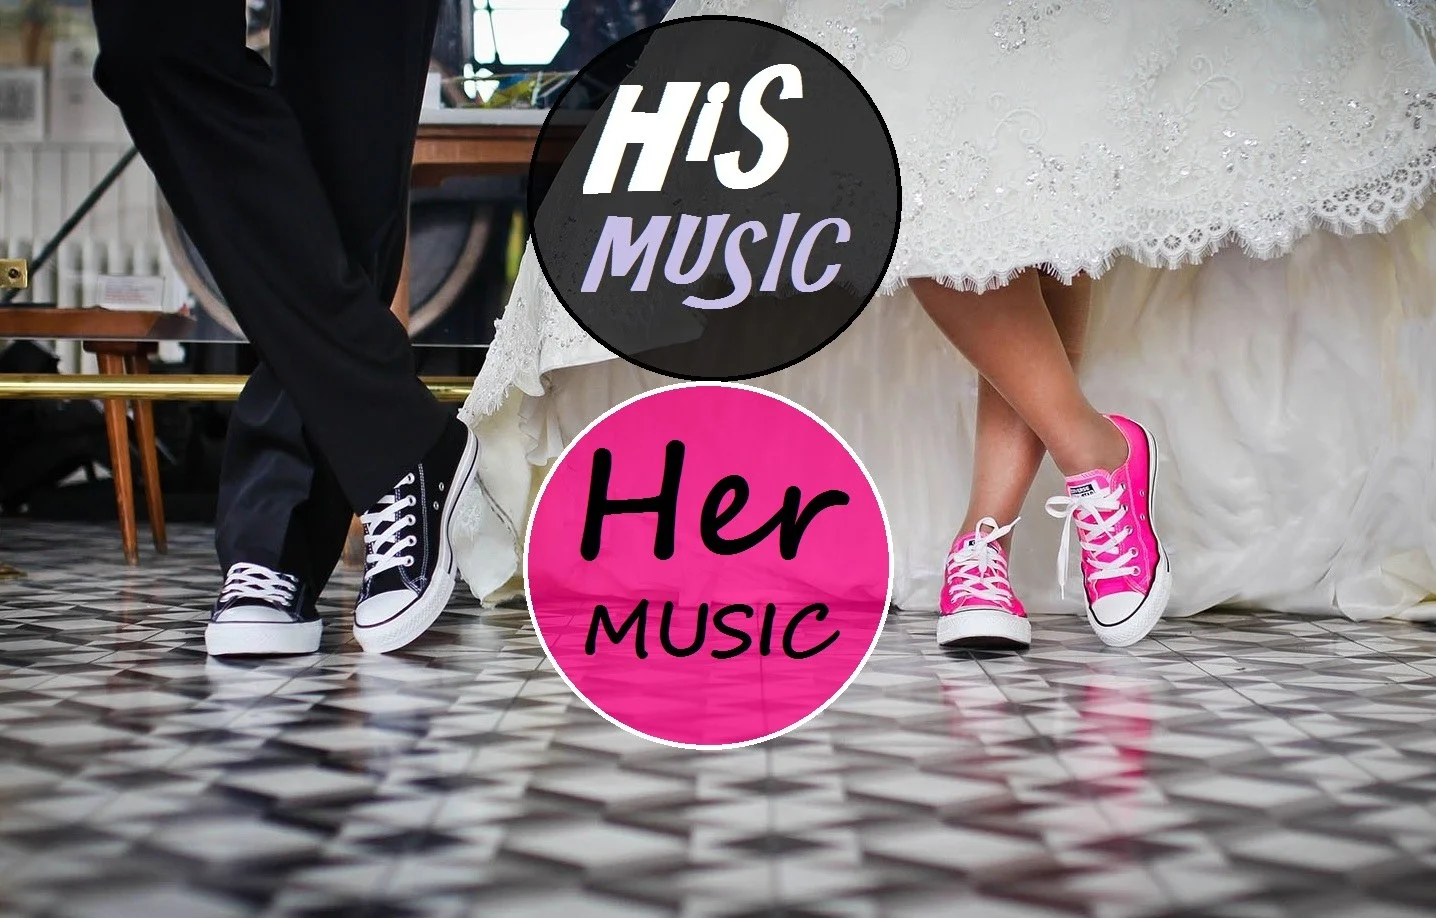 Best Wedding Music Top 200 wedding songs and hits made by Milwaukee Underground Productions DJ Service in Milwaukee